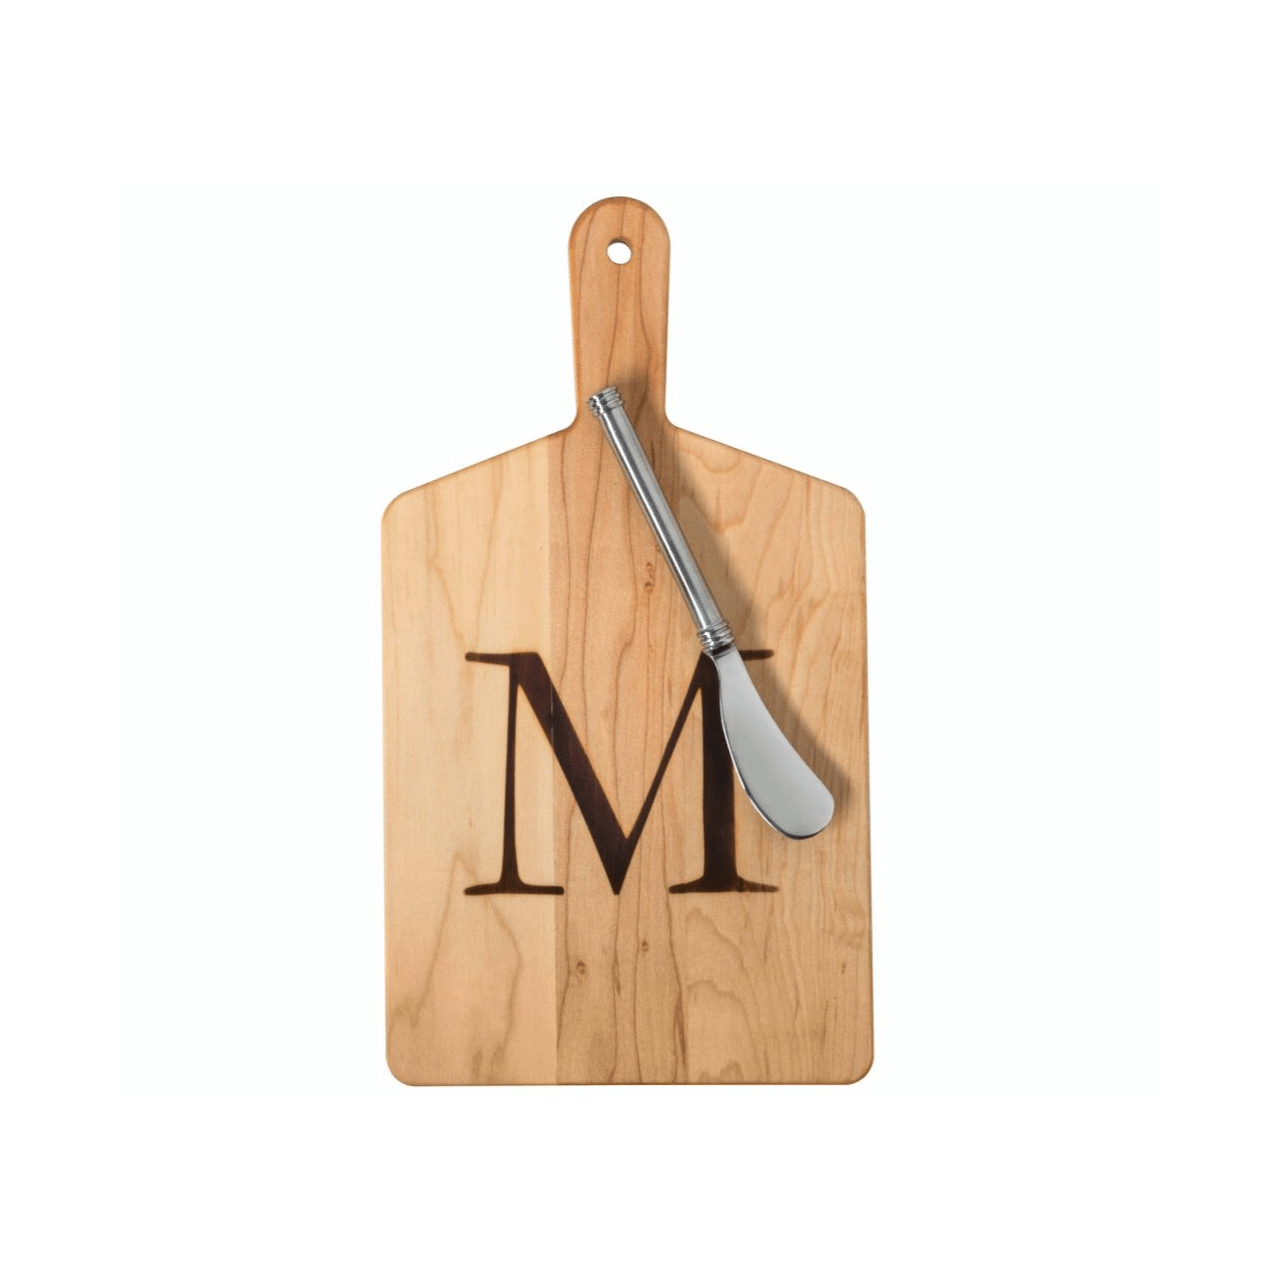 Maple Cheese Board with a Stamped A and Metal Spreader